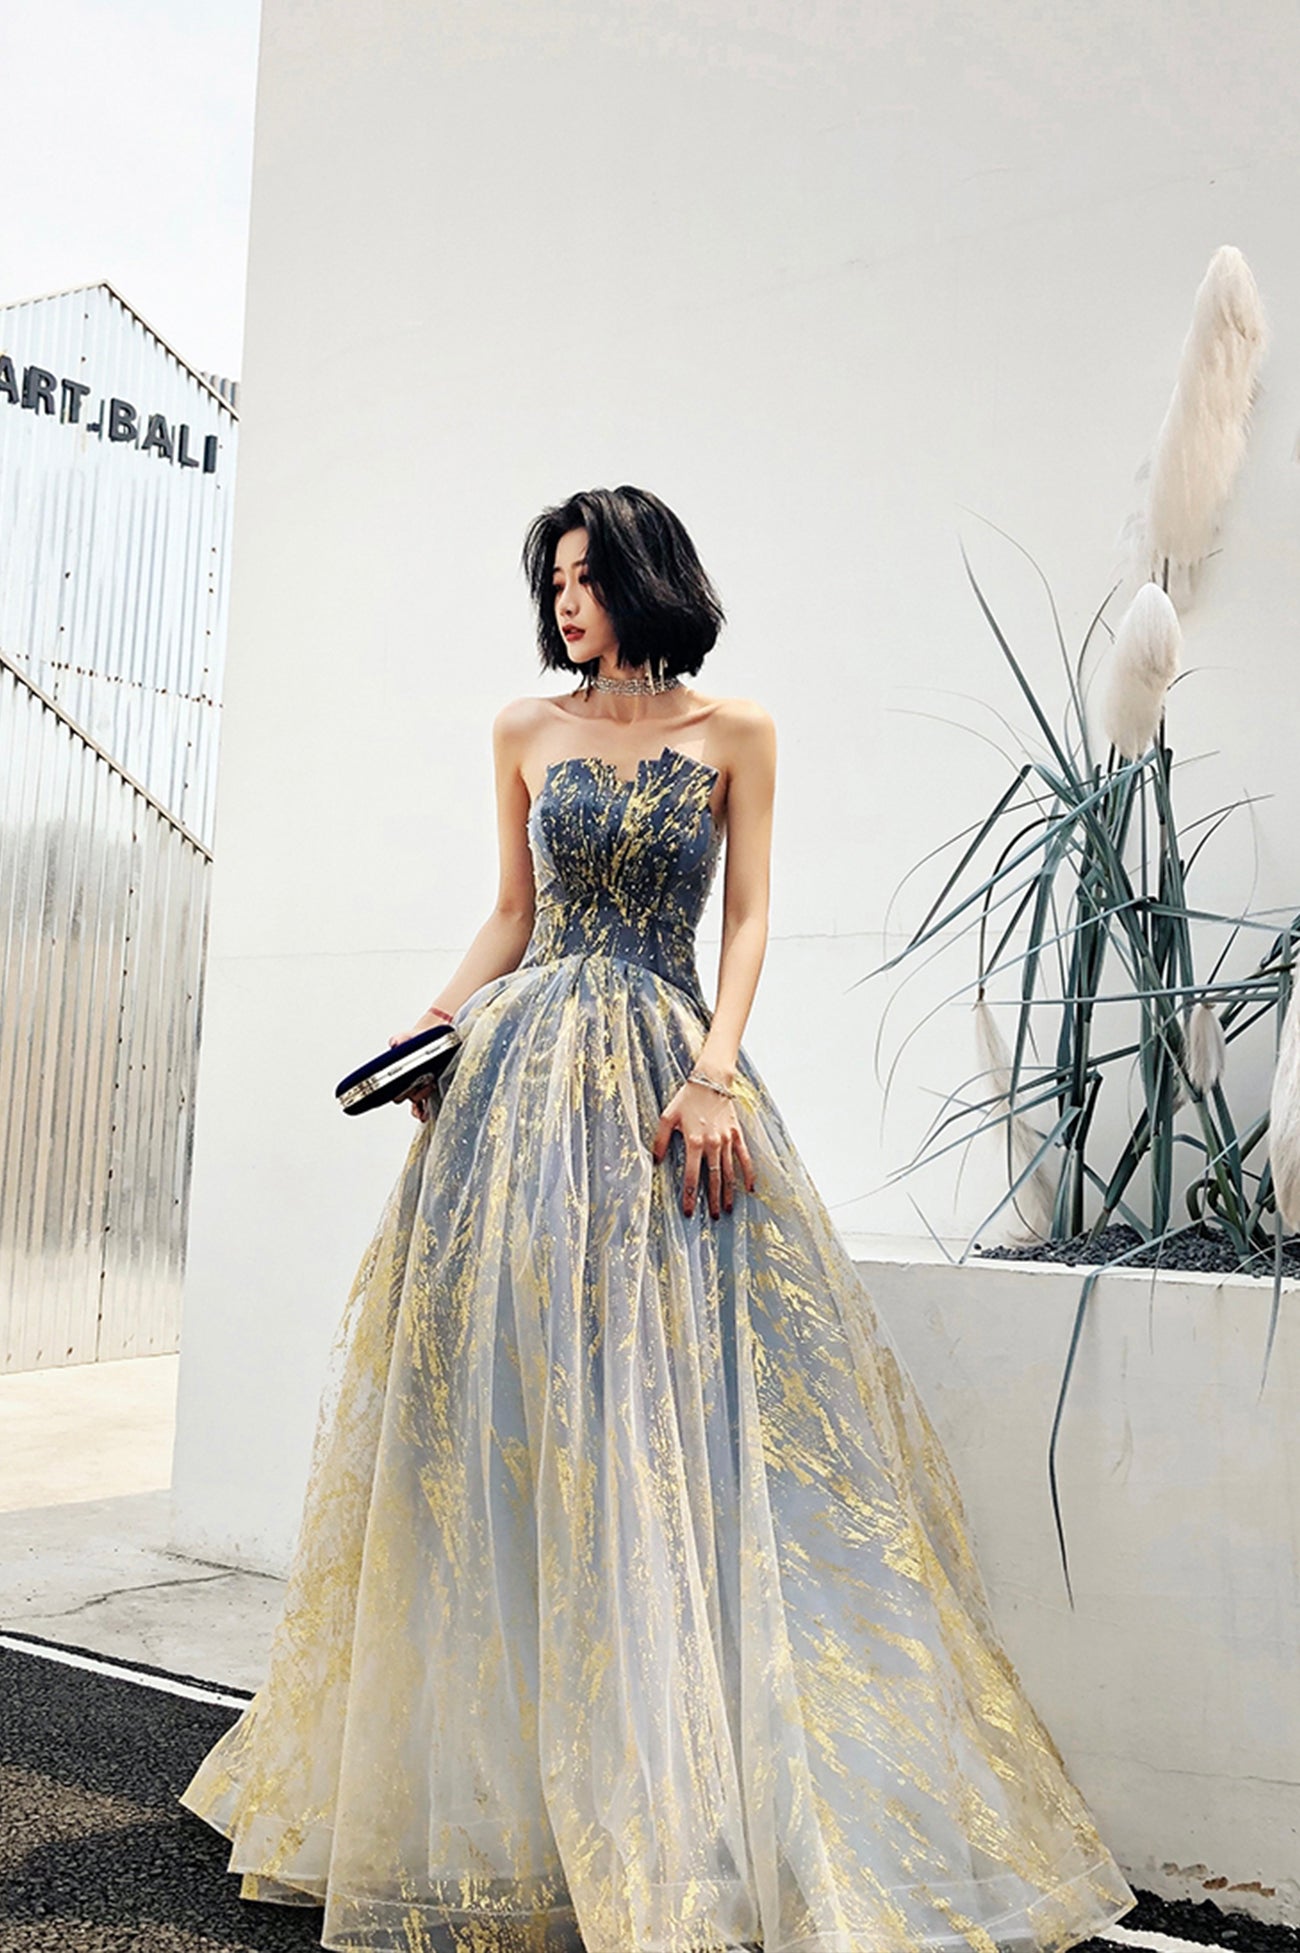 Stylish Tulle Sequins Long Prom Dress, A-Line Strapless Evening Party Dress